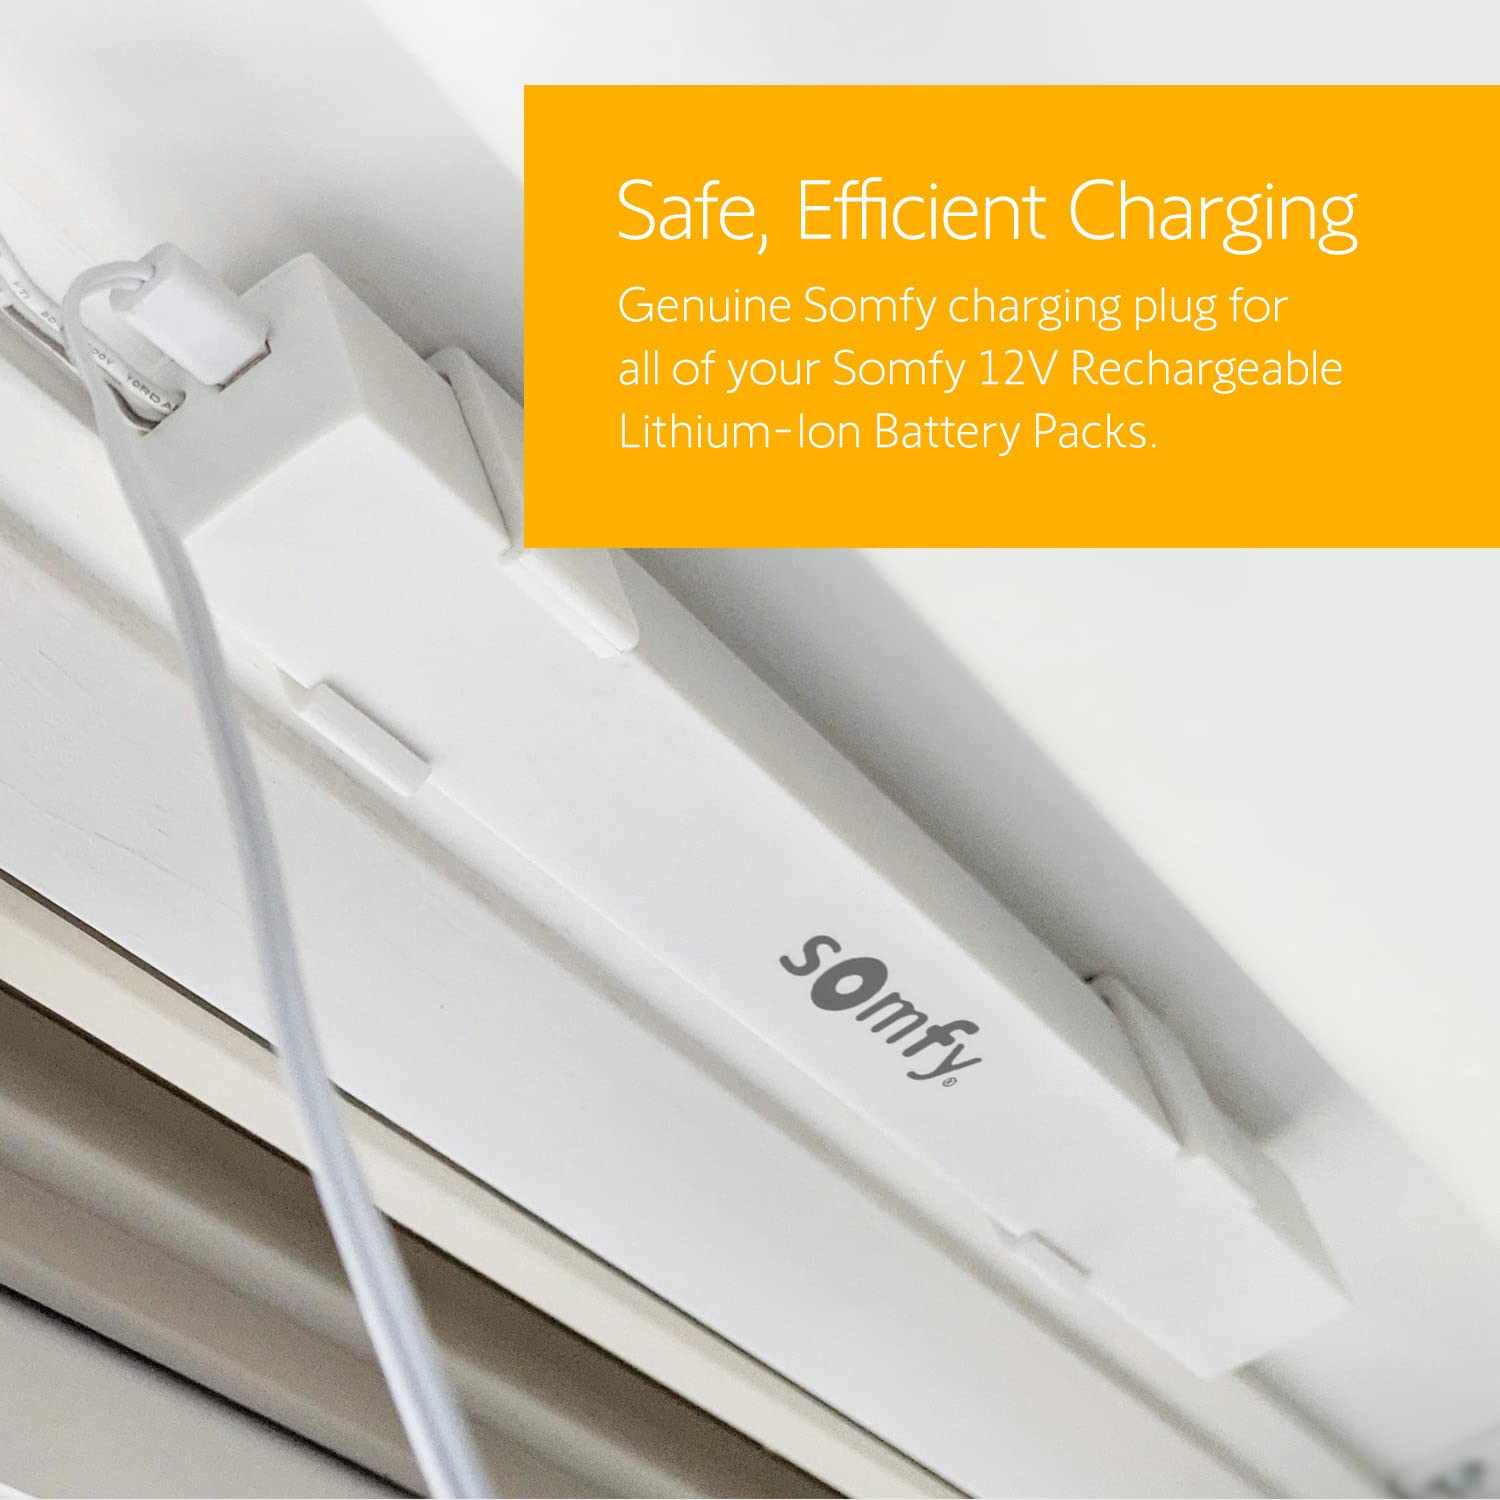 Somfy Lithium-ion Charger - Charge Rechargeable Lithium ion Battery for Motorized Shades, Blinds, Curtains and Awnings - Long Lasting Power for Battery Pack - Somfy Battery Charger - #9025166